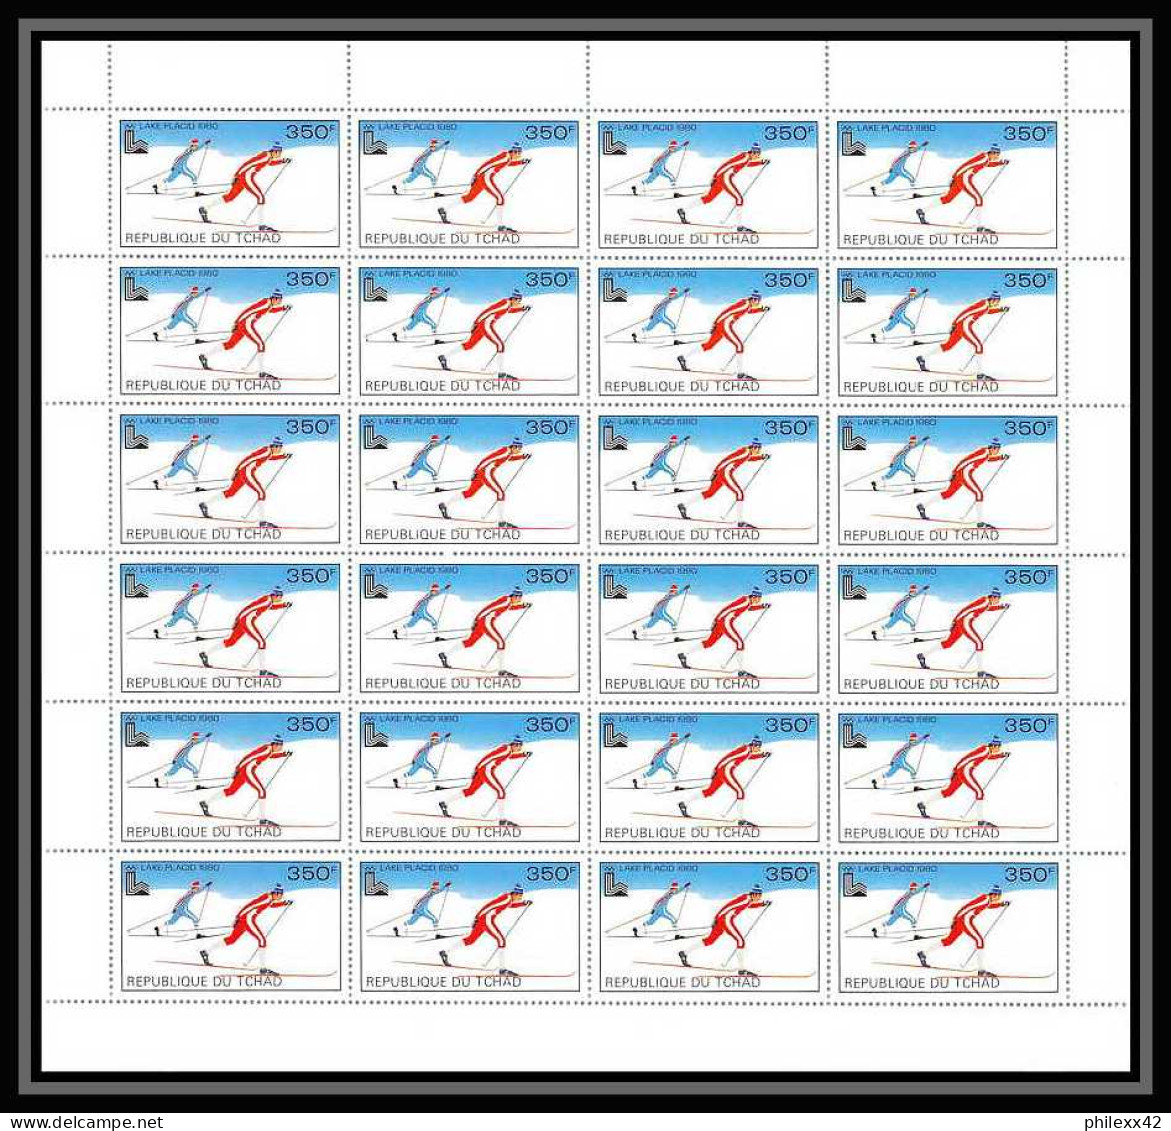 314 Tchad Yvert ** MNH N° 375 Jeux Olympiques Olympic Games Lake Placid Feuilles (sheets) Cross-country Ski Cote 96 Eur - Winter 1980: Lake Placid